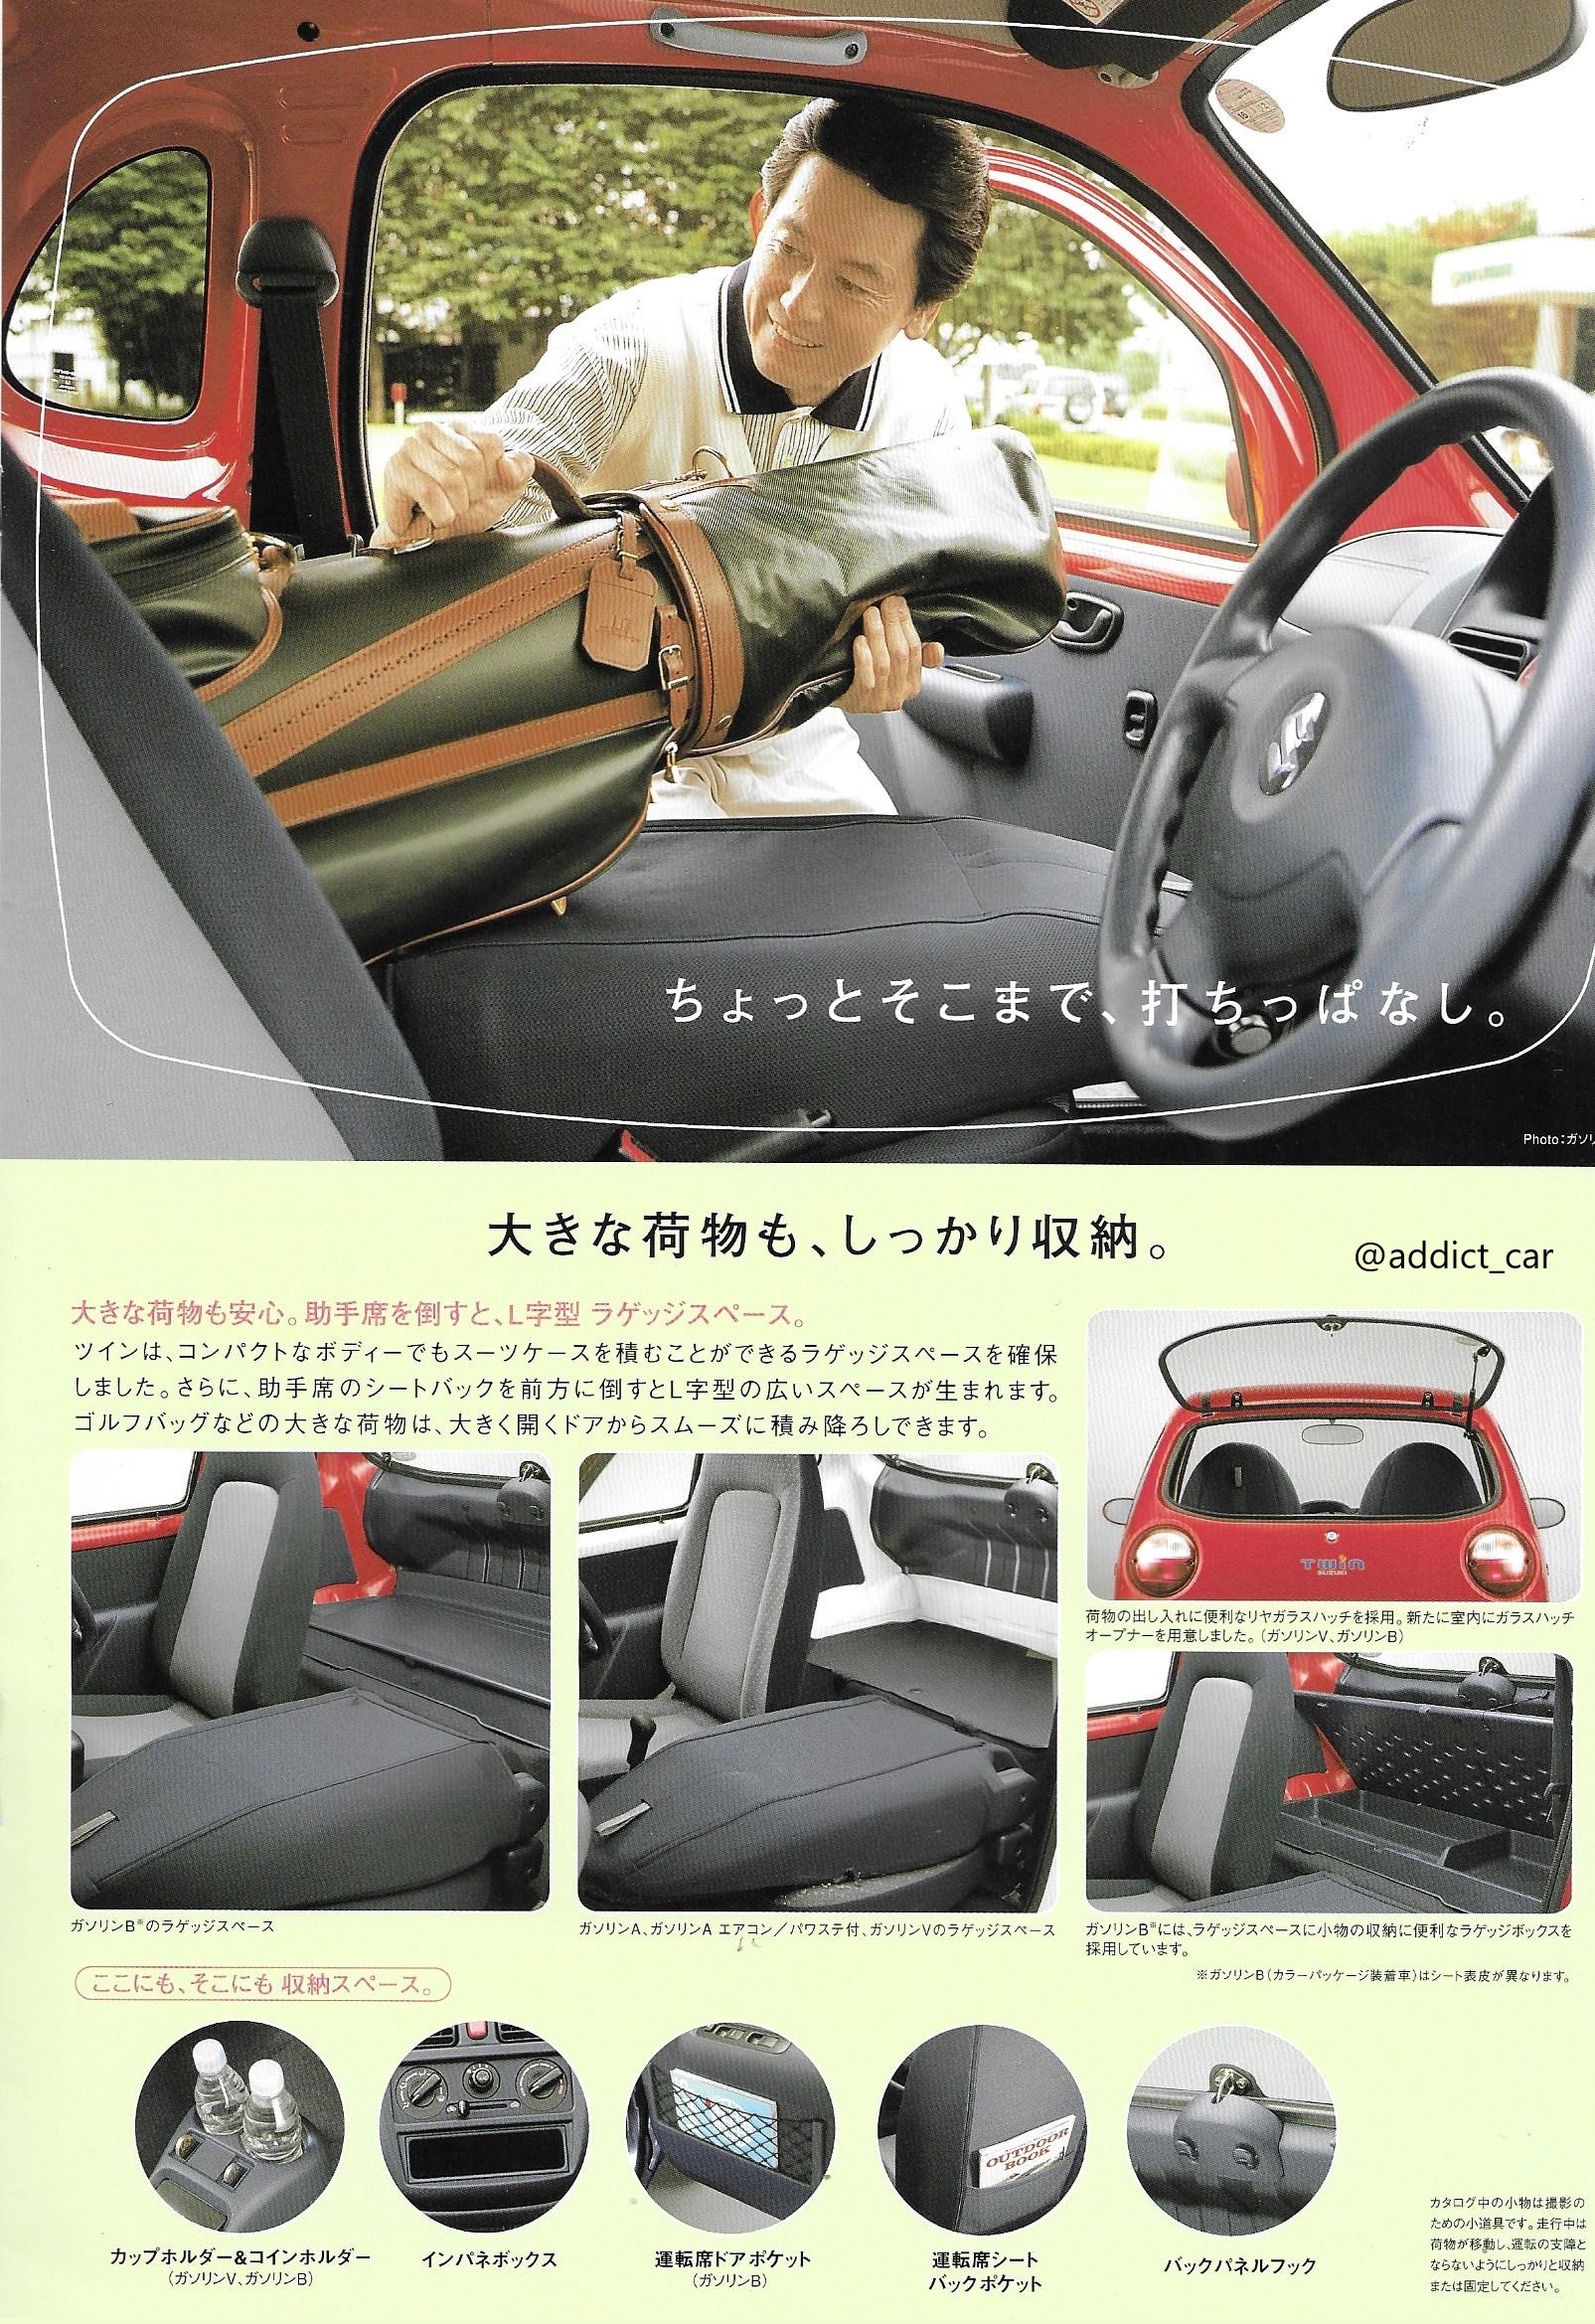 Car Brochure Addict The Suzuki Twin Featured An Innovative Interior Where The Front Seat Could Fold Down Flat To Make Maximum Use Of The Interior Space When Driving Alone The